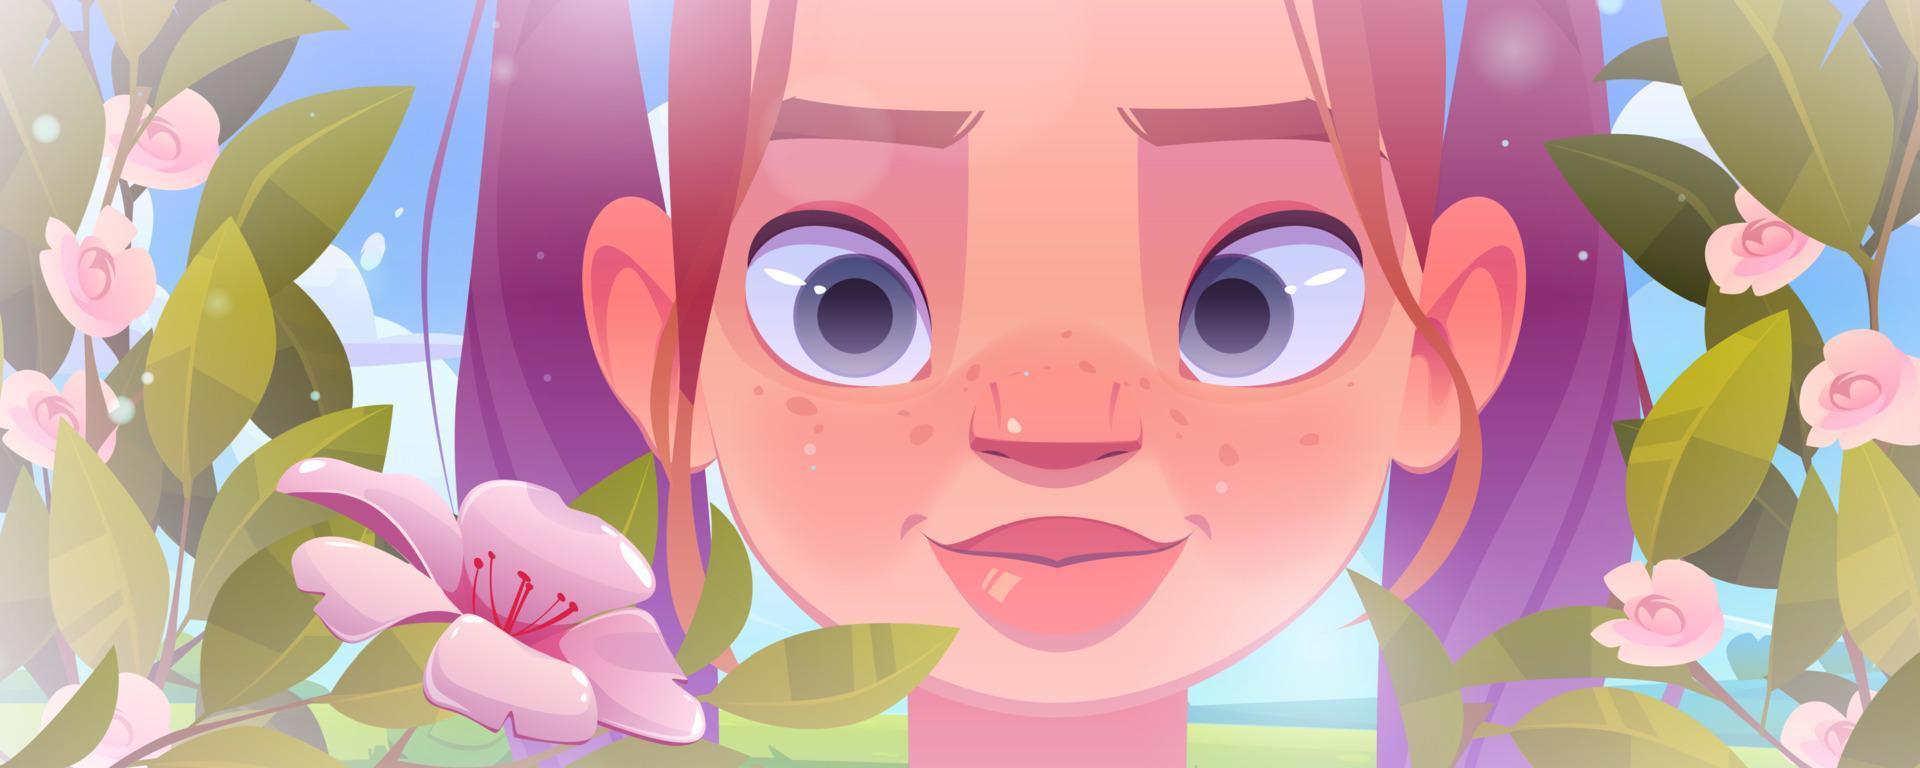 Girl face and flowers at spring or summer garden vector